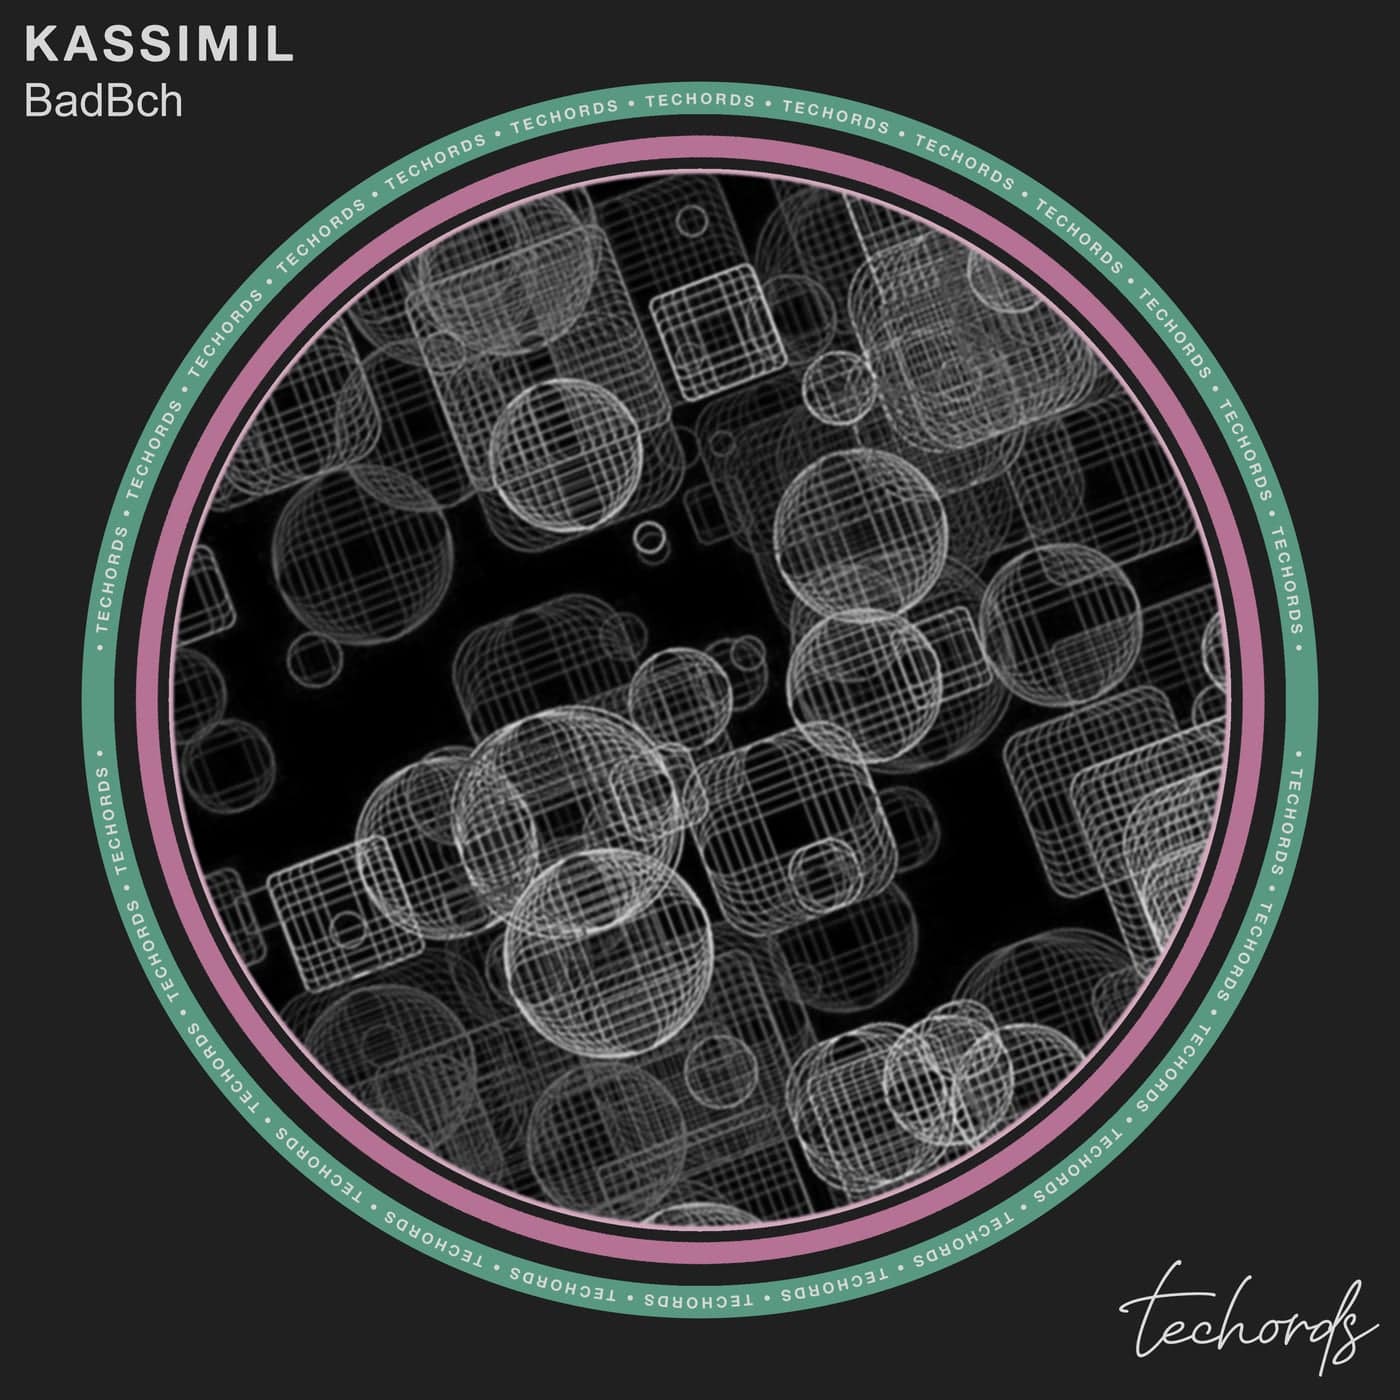 image cover: KASSIMIL - BadBch on Techords